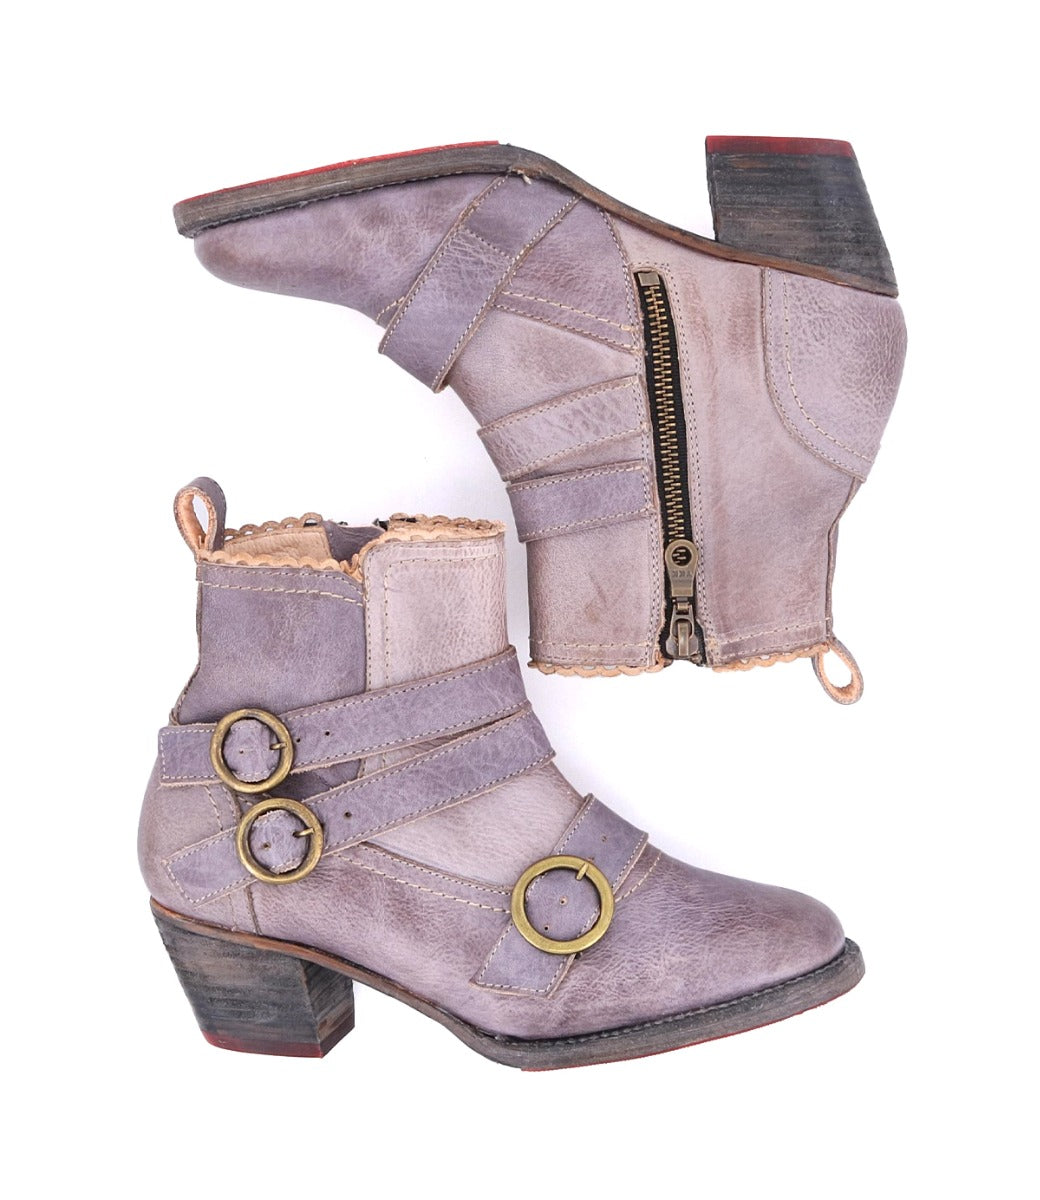 A pair of Bady ankle boots with buckles, made from real leather.